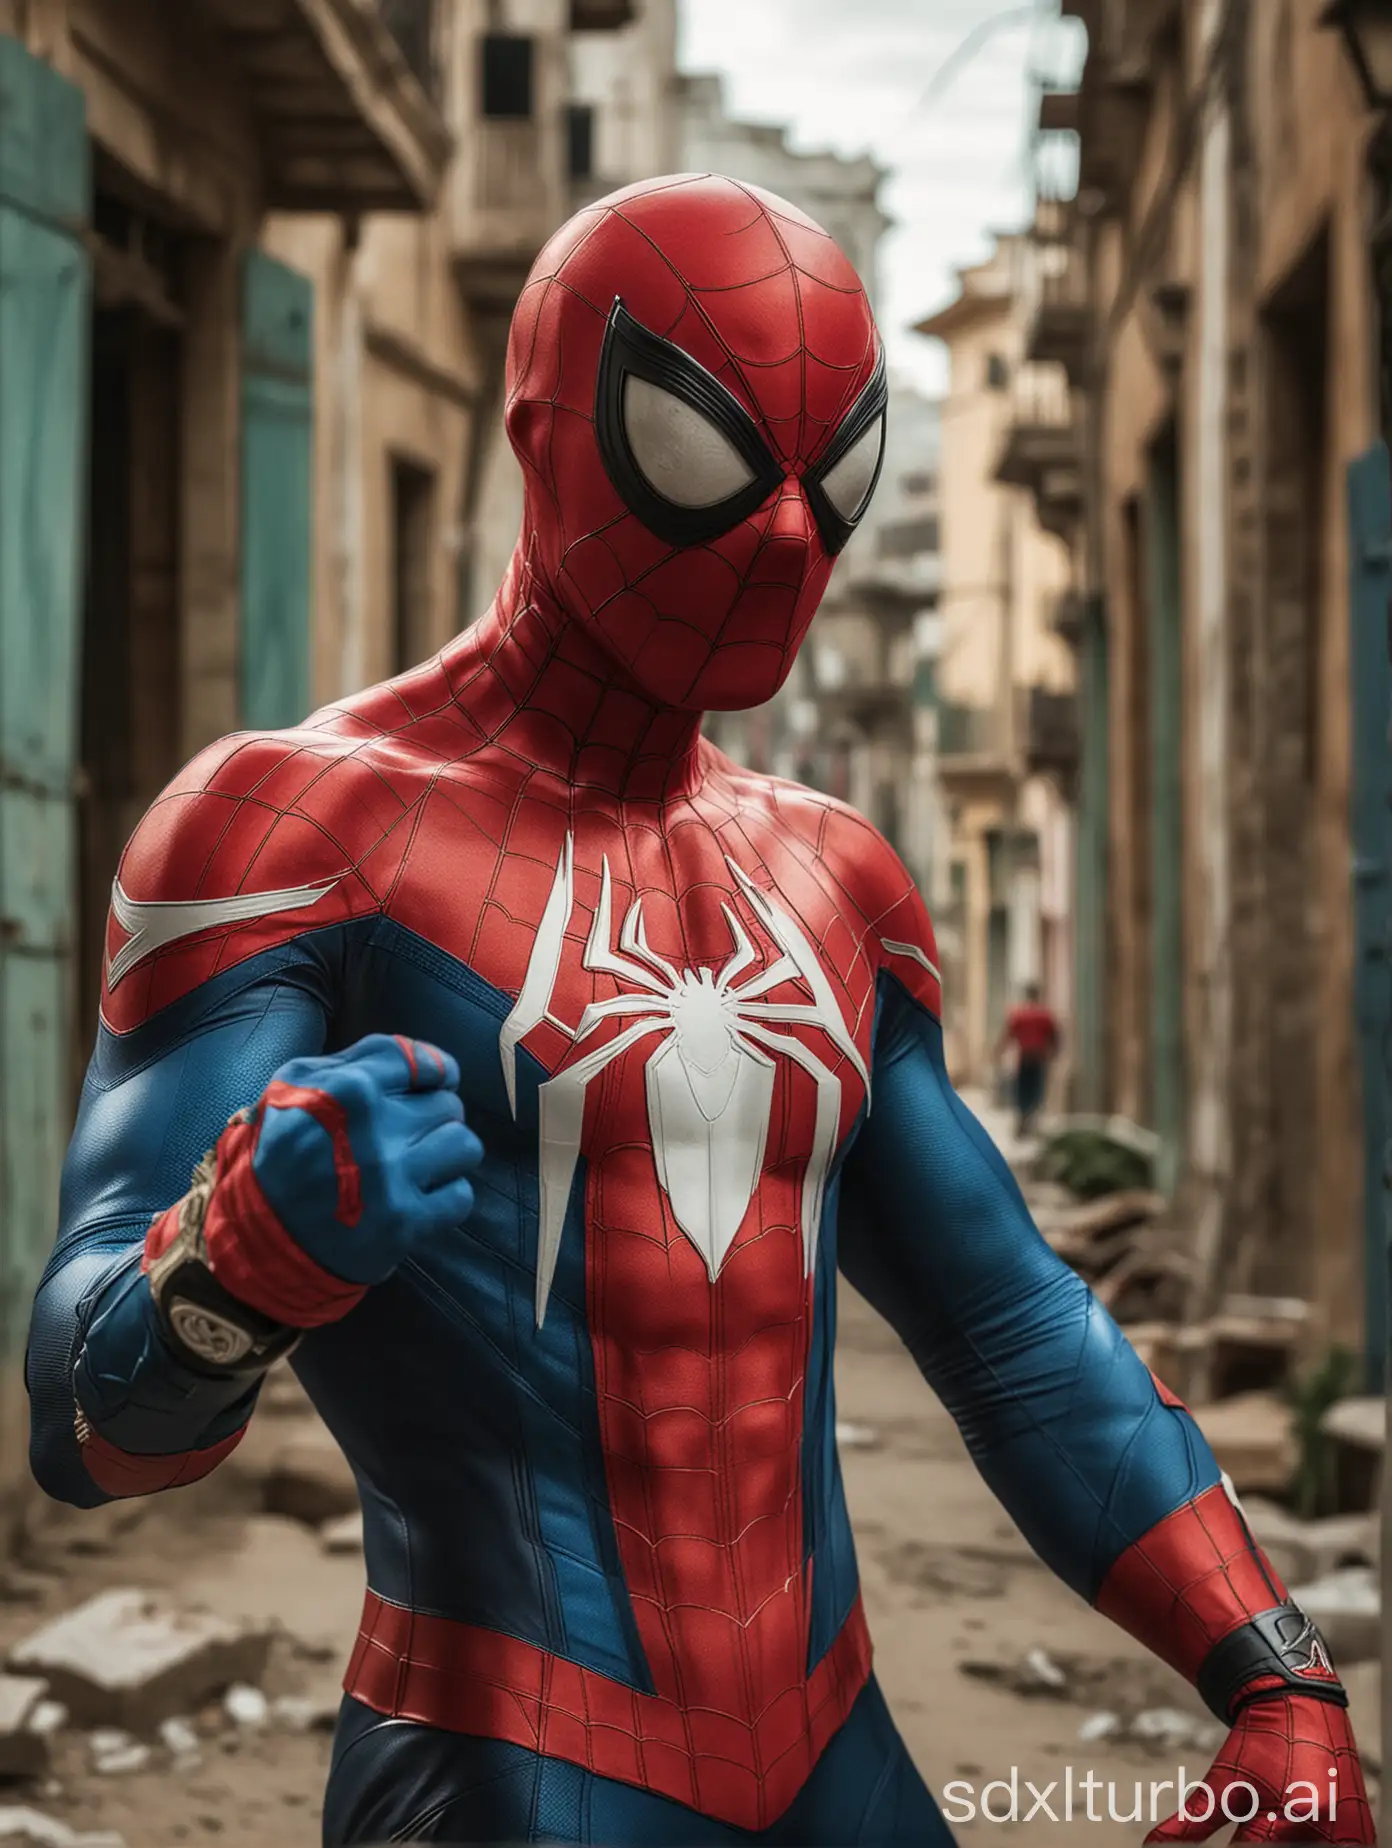 Spiderman-Poses-in-Cuban-Flag-Colors-Suit-with-Mask-in-Hand